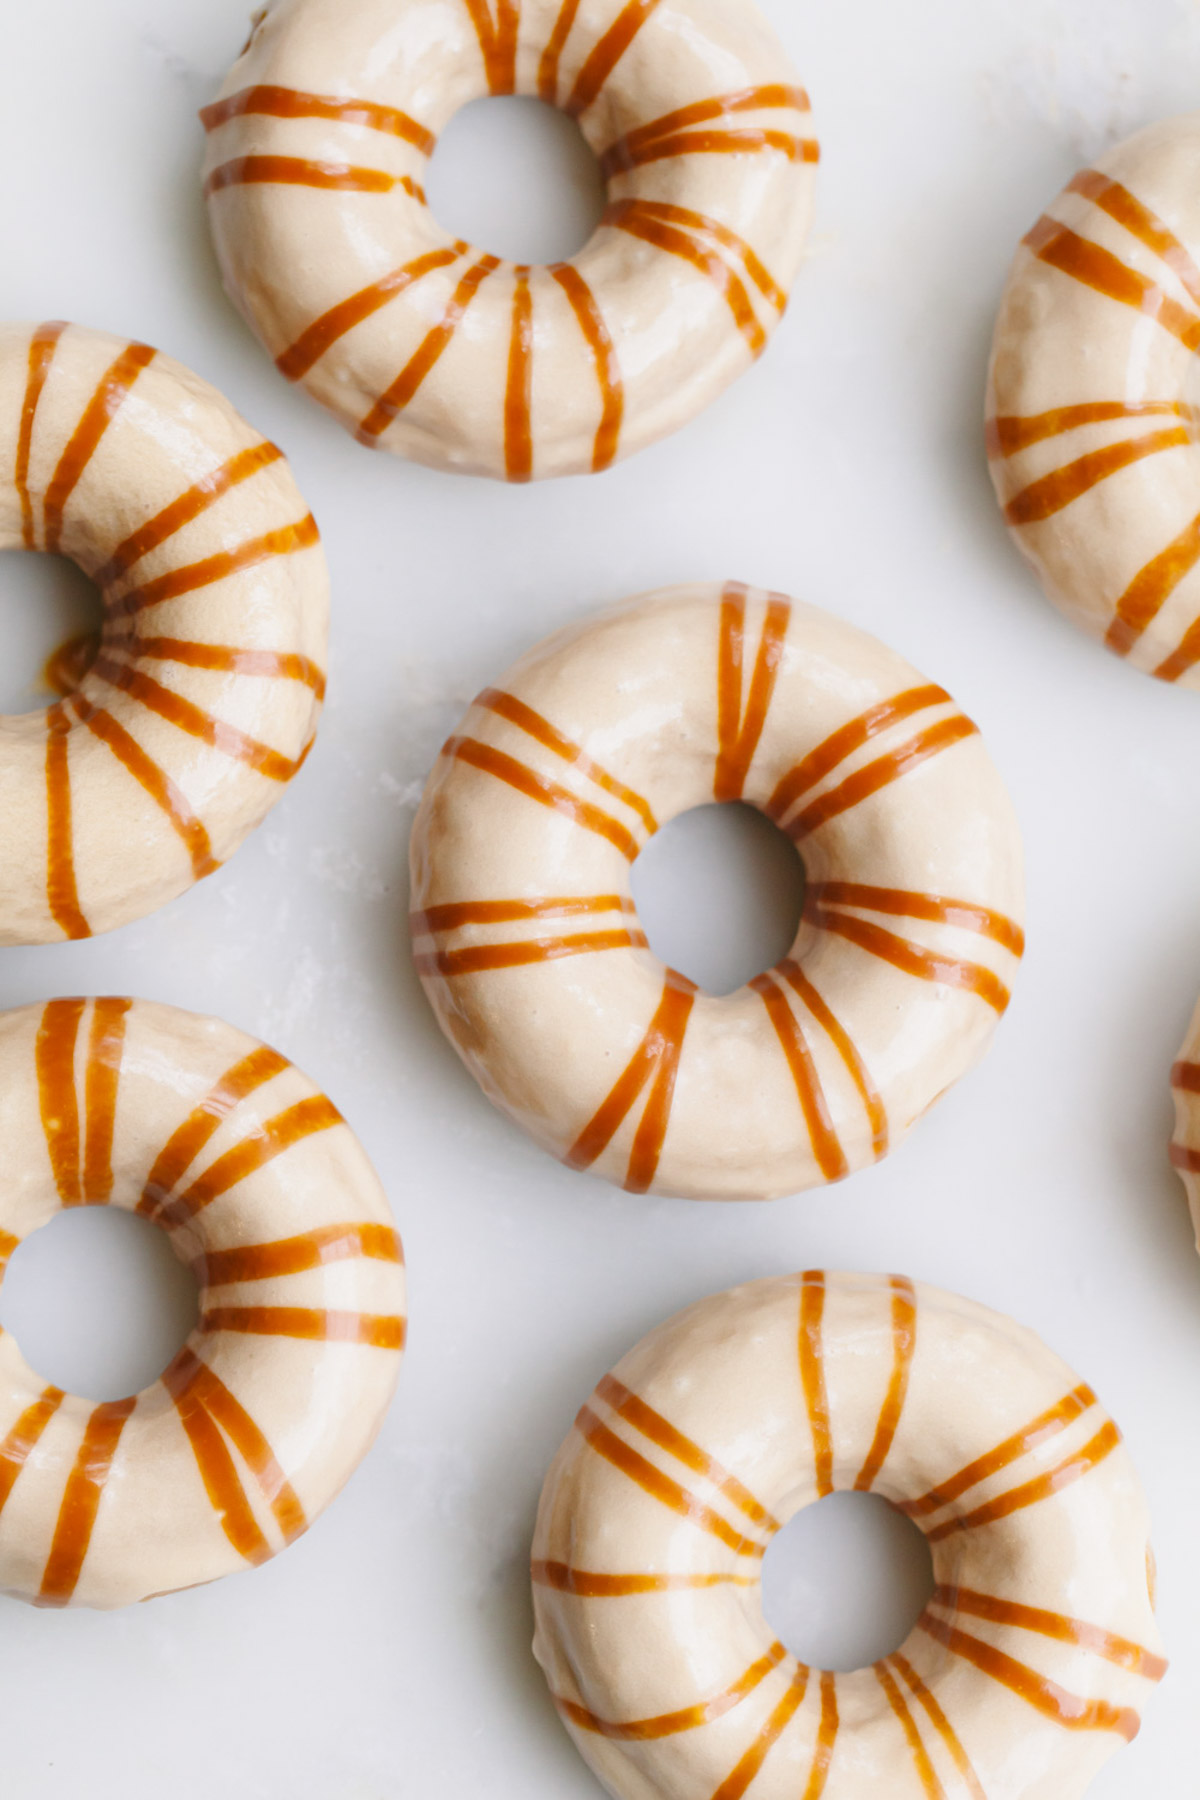 An overhead image of pumpkin donuts with salted caramel glaze